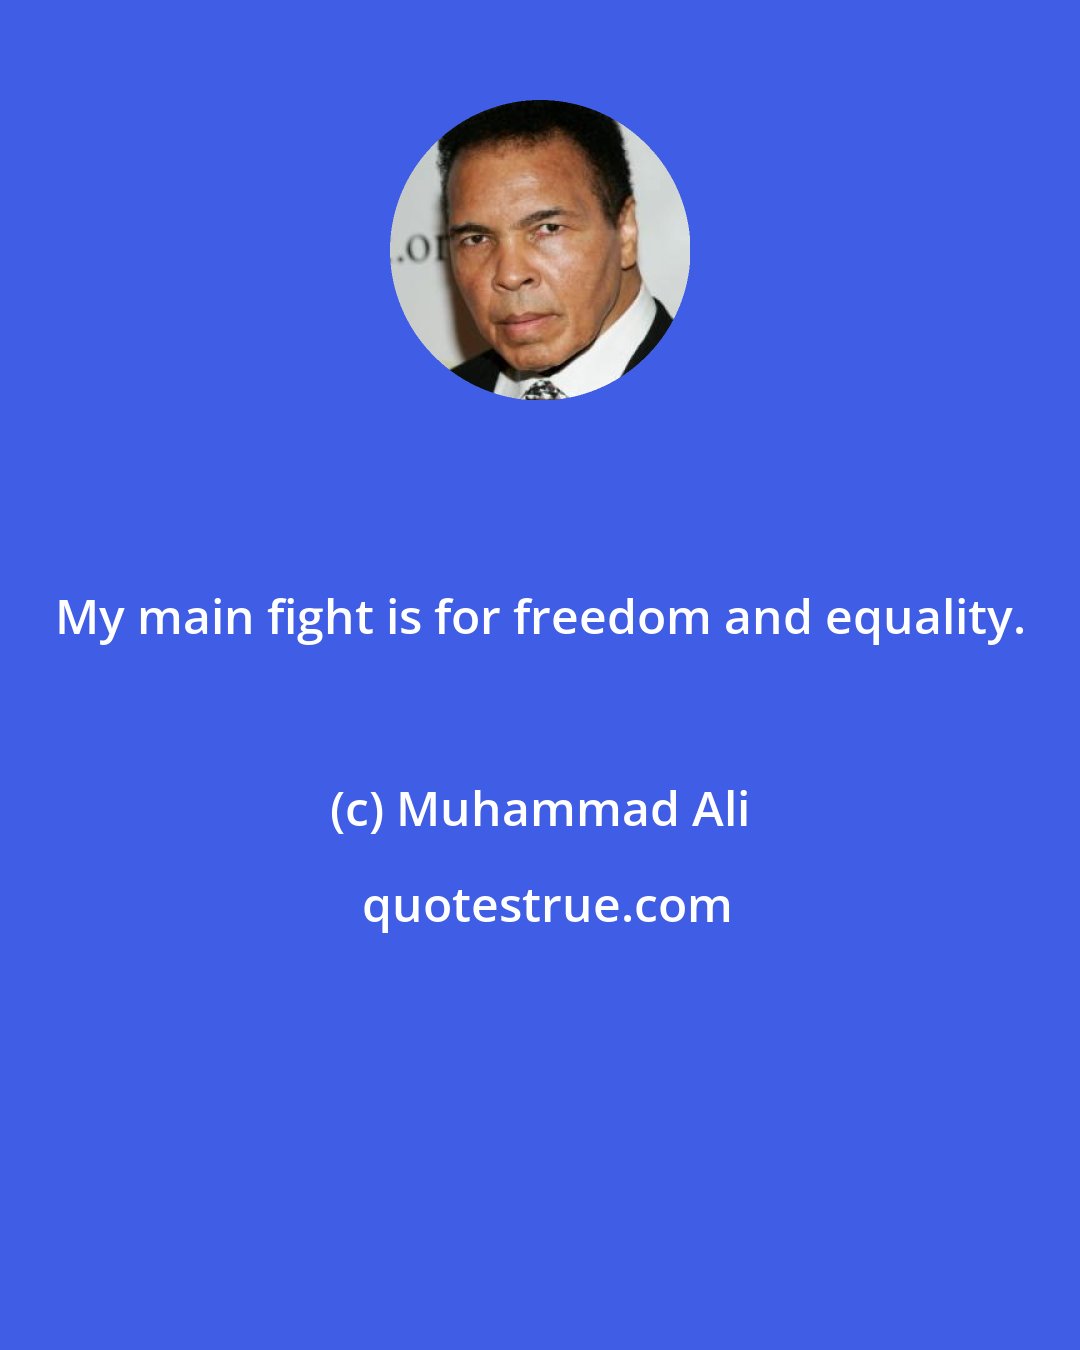 Muhammad Ali: My main fight is for freedom and equality.